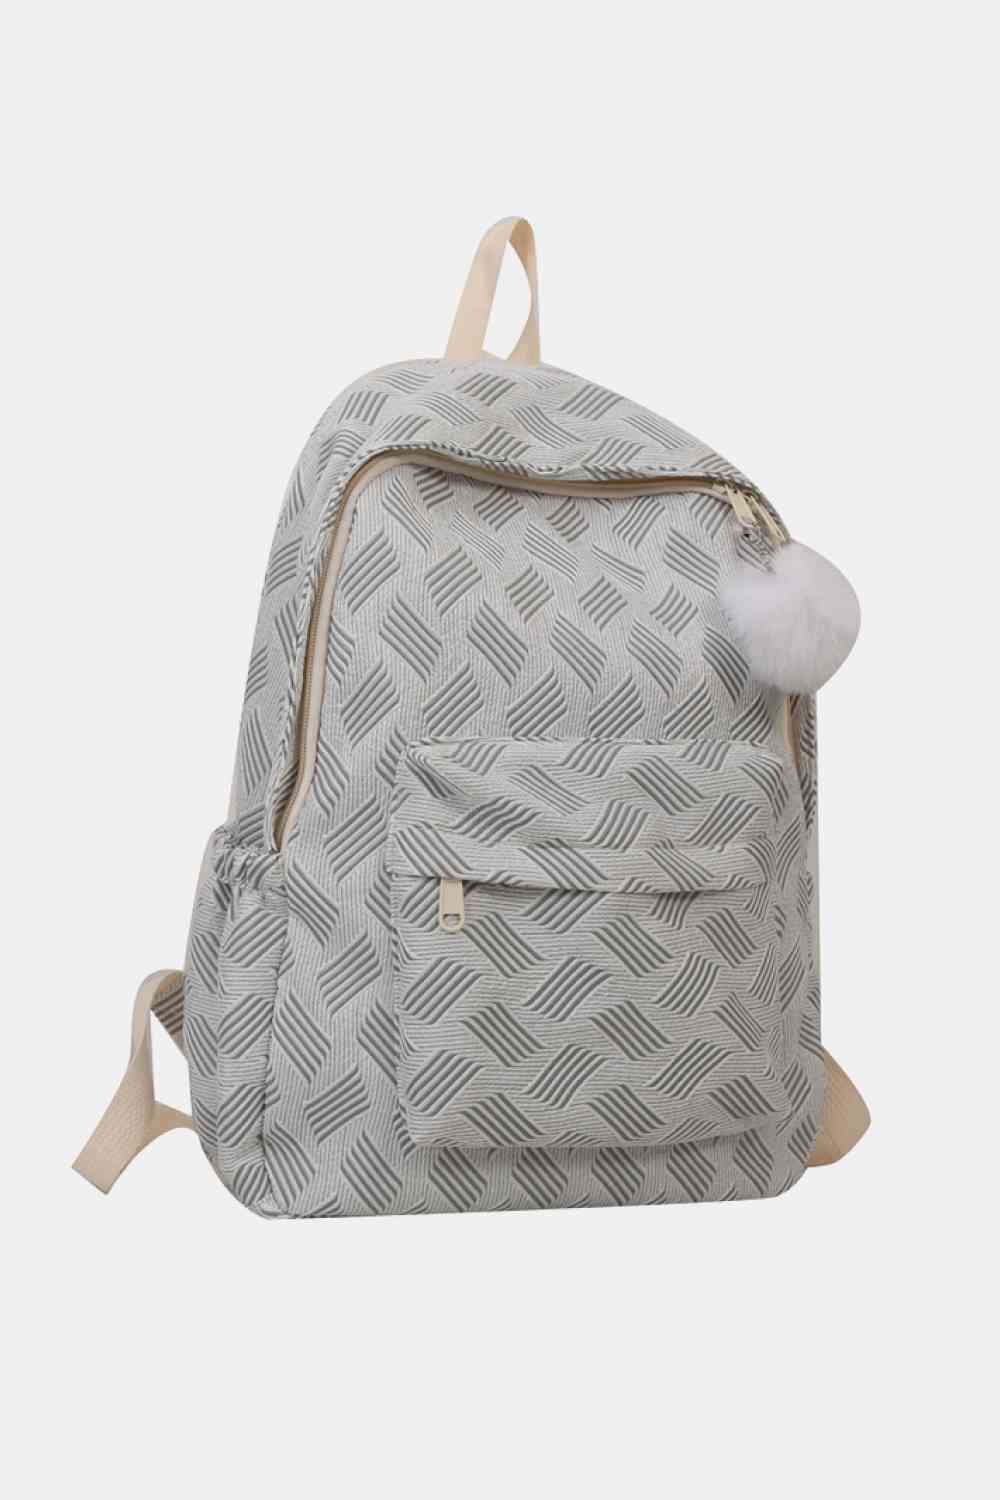 Printed Polyester Large Backpack (Fluffy Ball Included)  Hot Trends